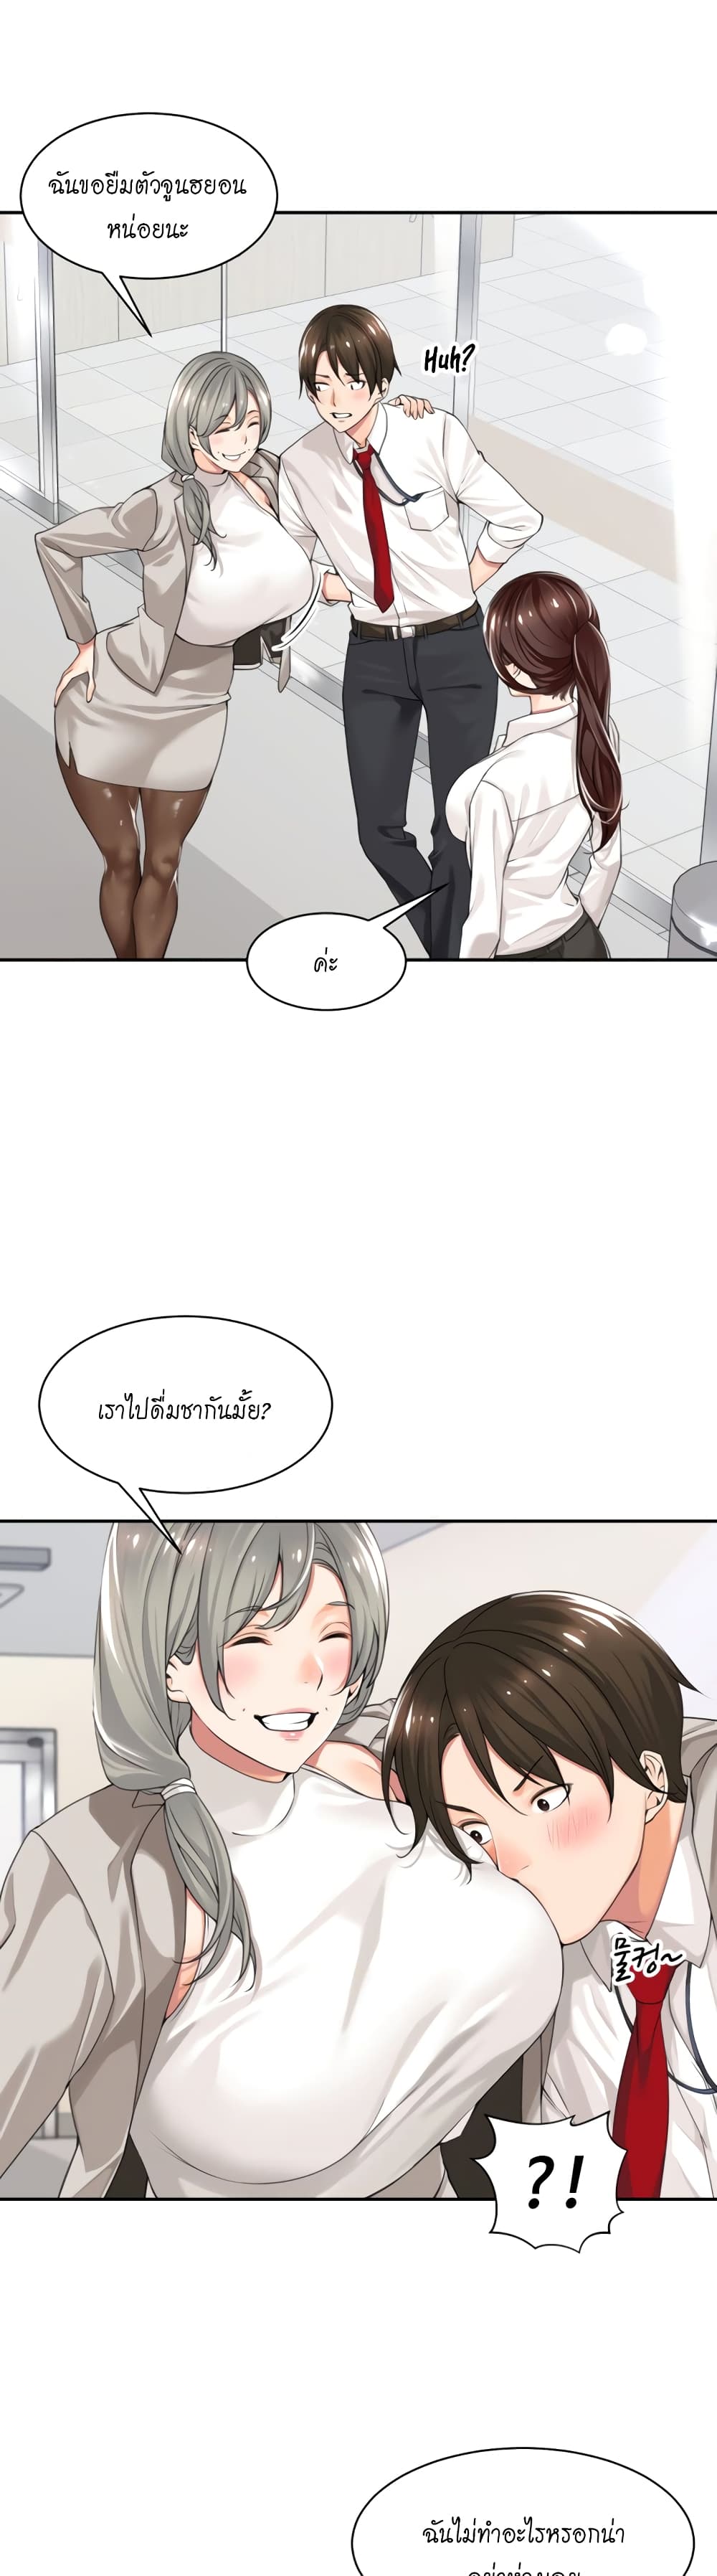 Manager, Please Scold Me ตอนที่ 1 ภาพ 14